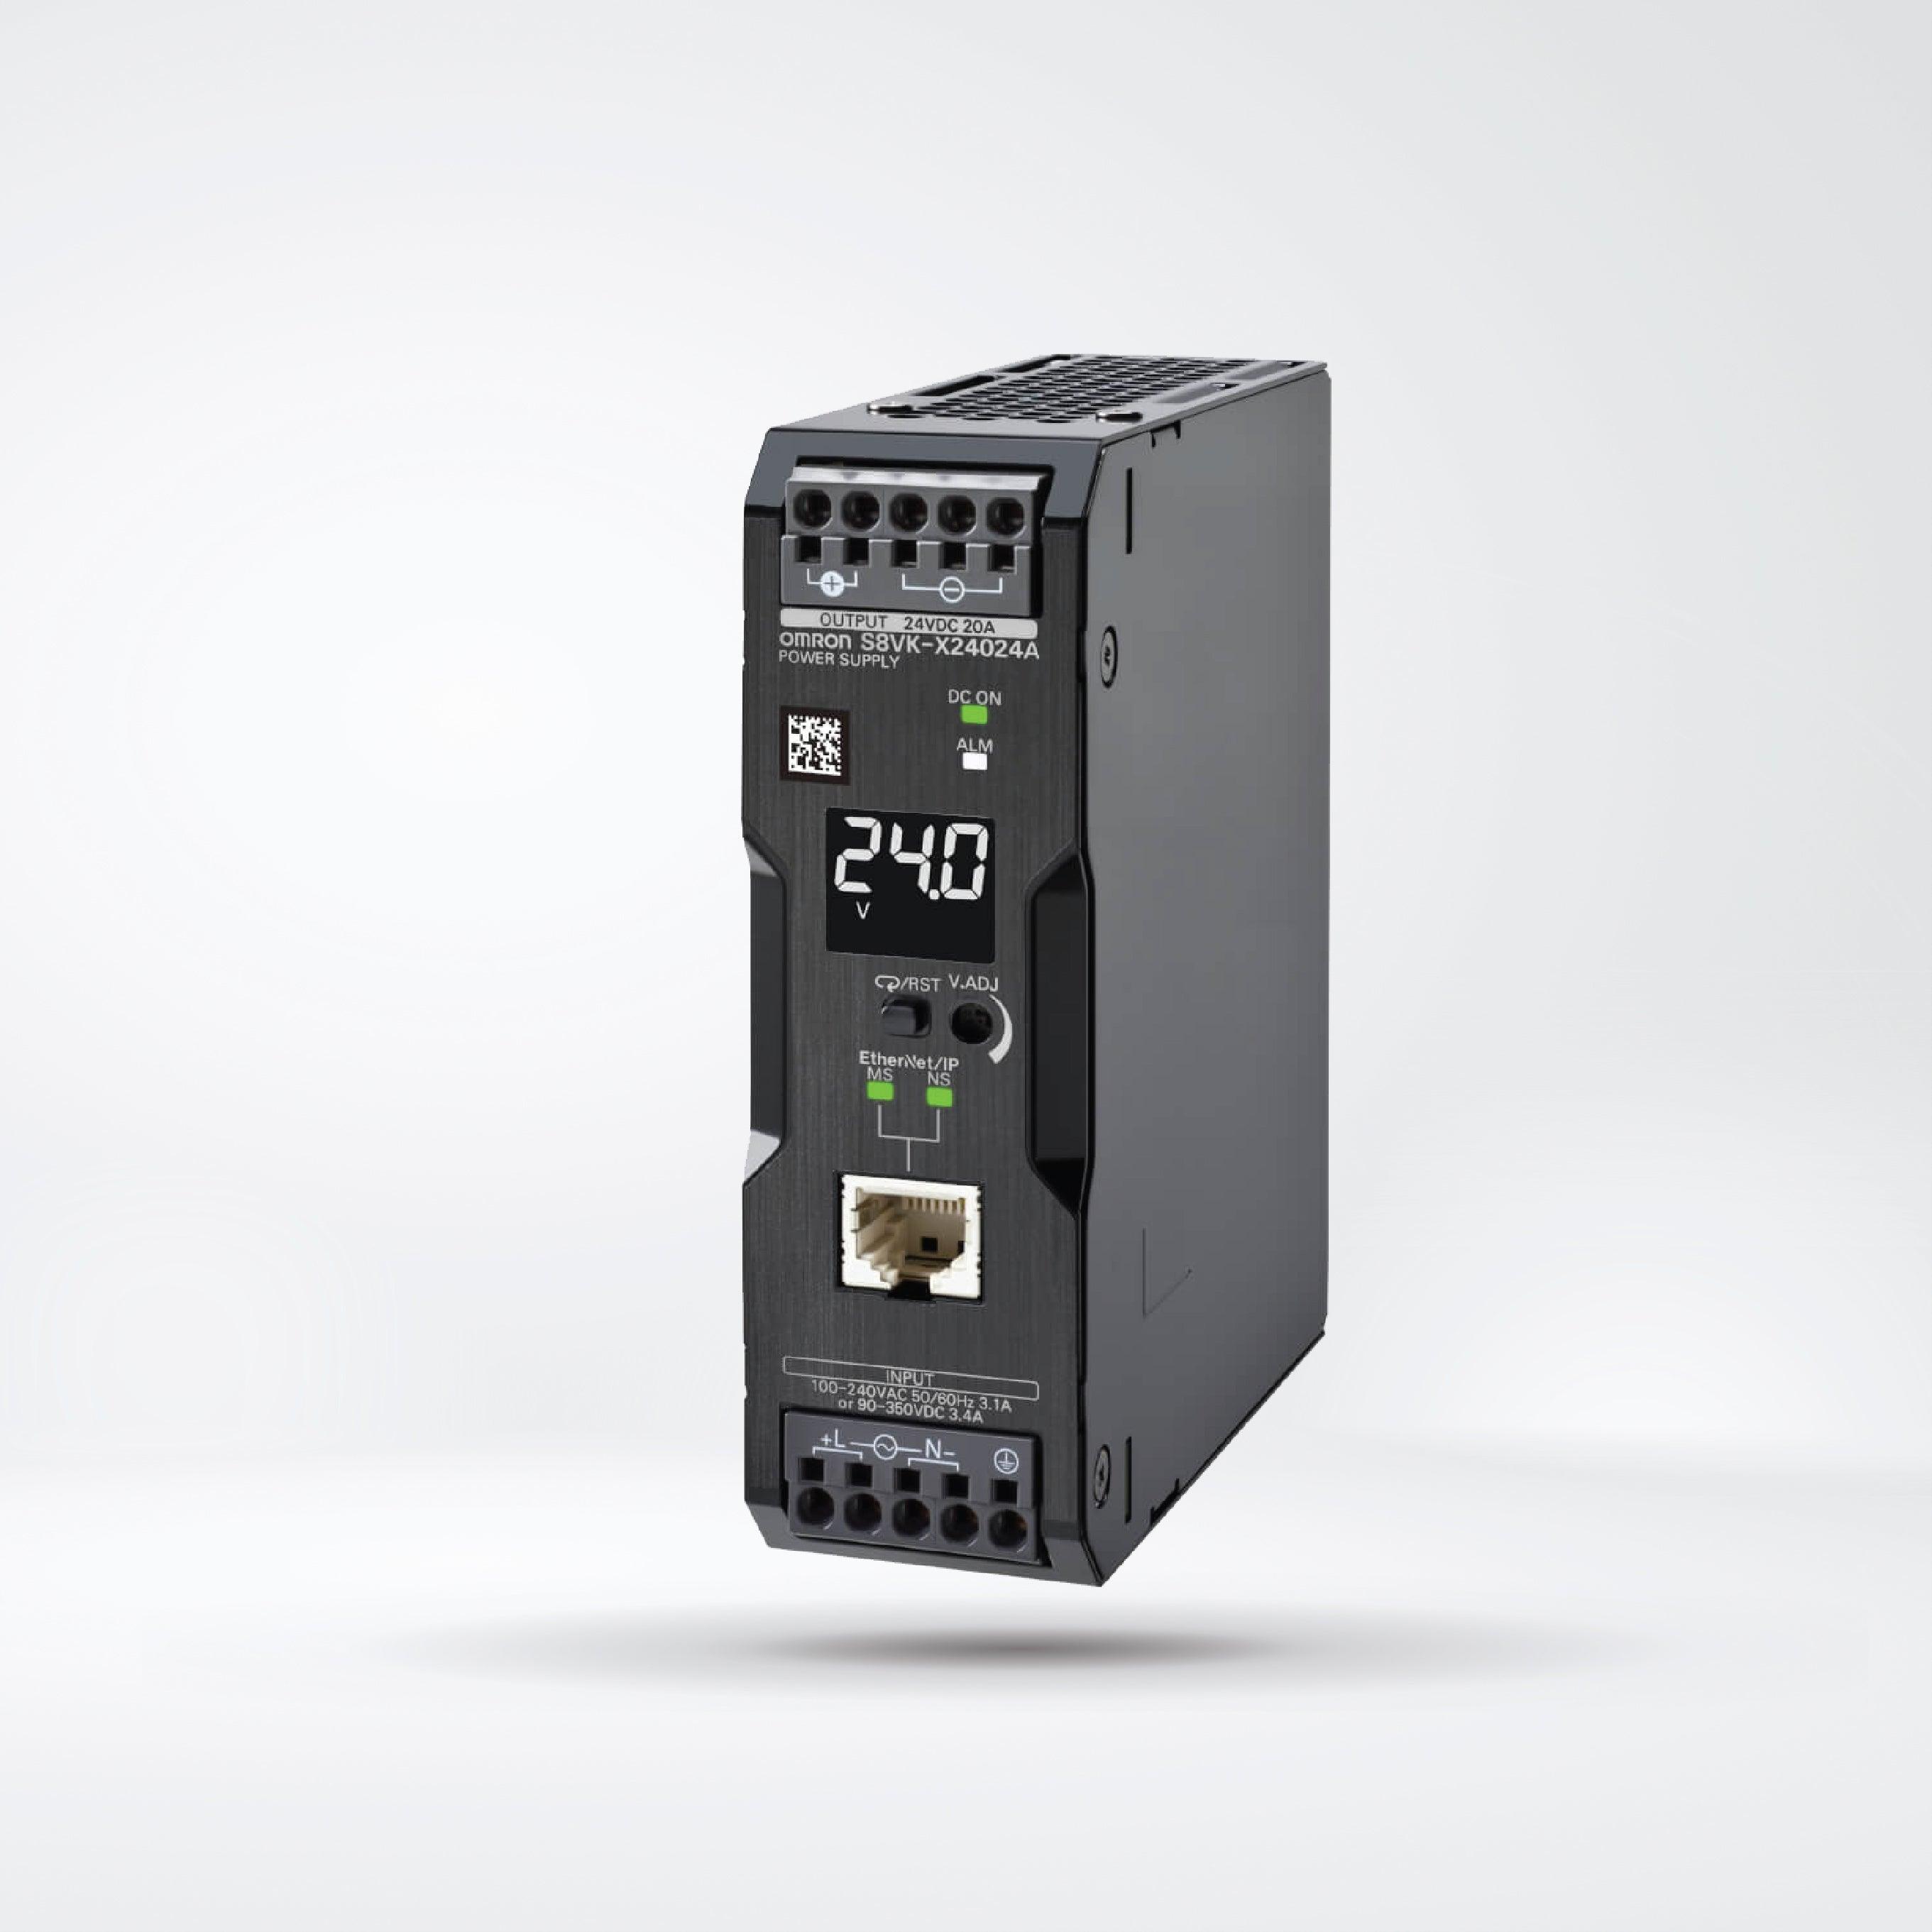 S8VK-X24024A-EIP Switch Mode Power Supply, with EtherNet/IP, Modbus TCP,240 W, 24 VDC, display - Riverplus